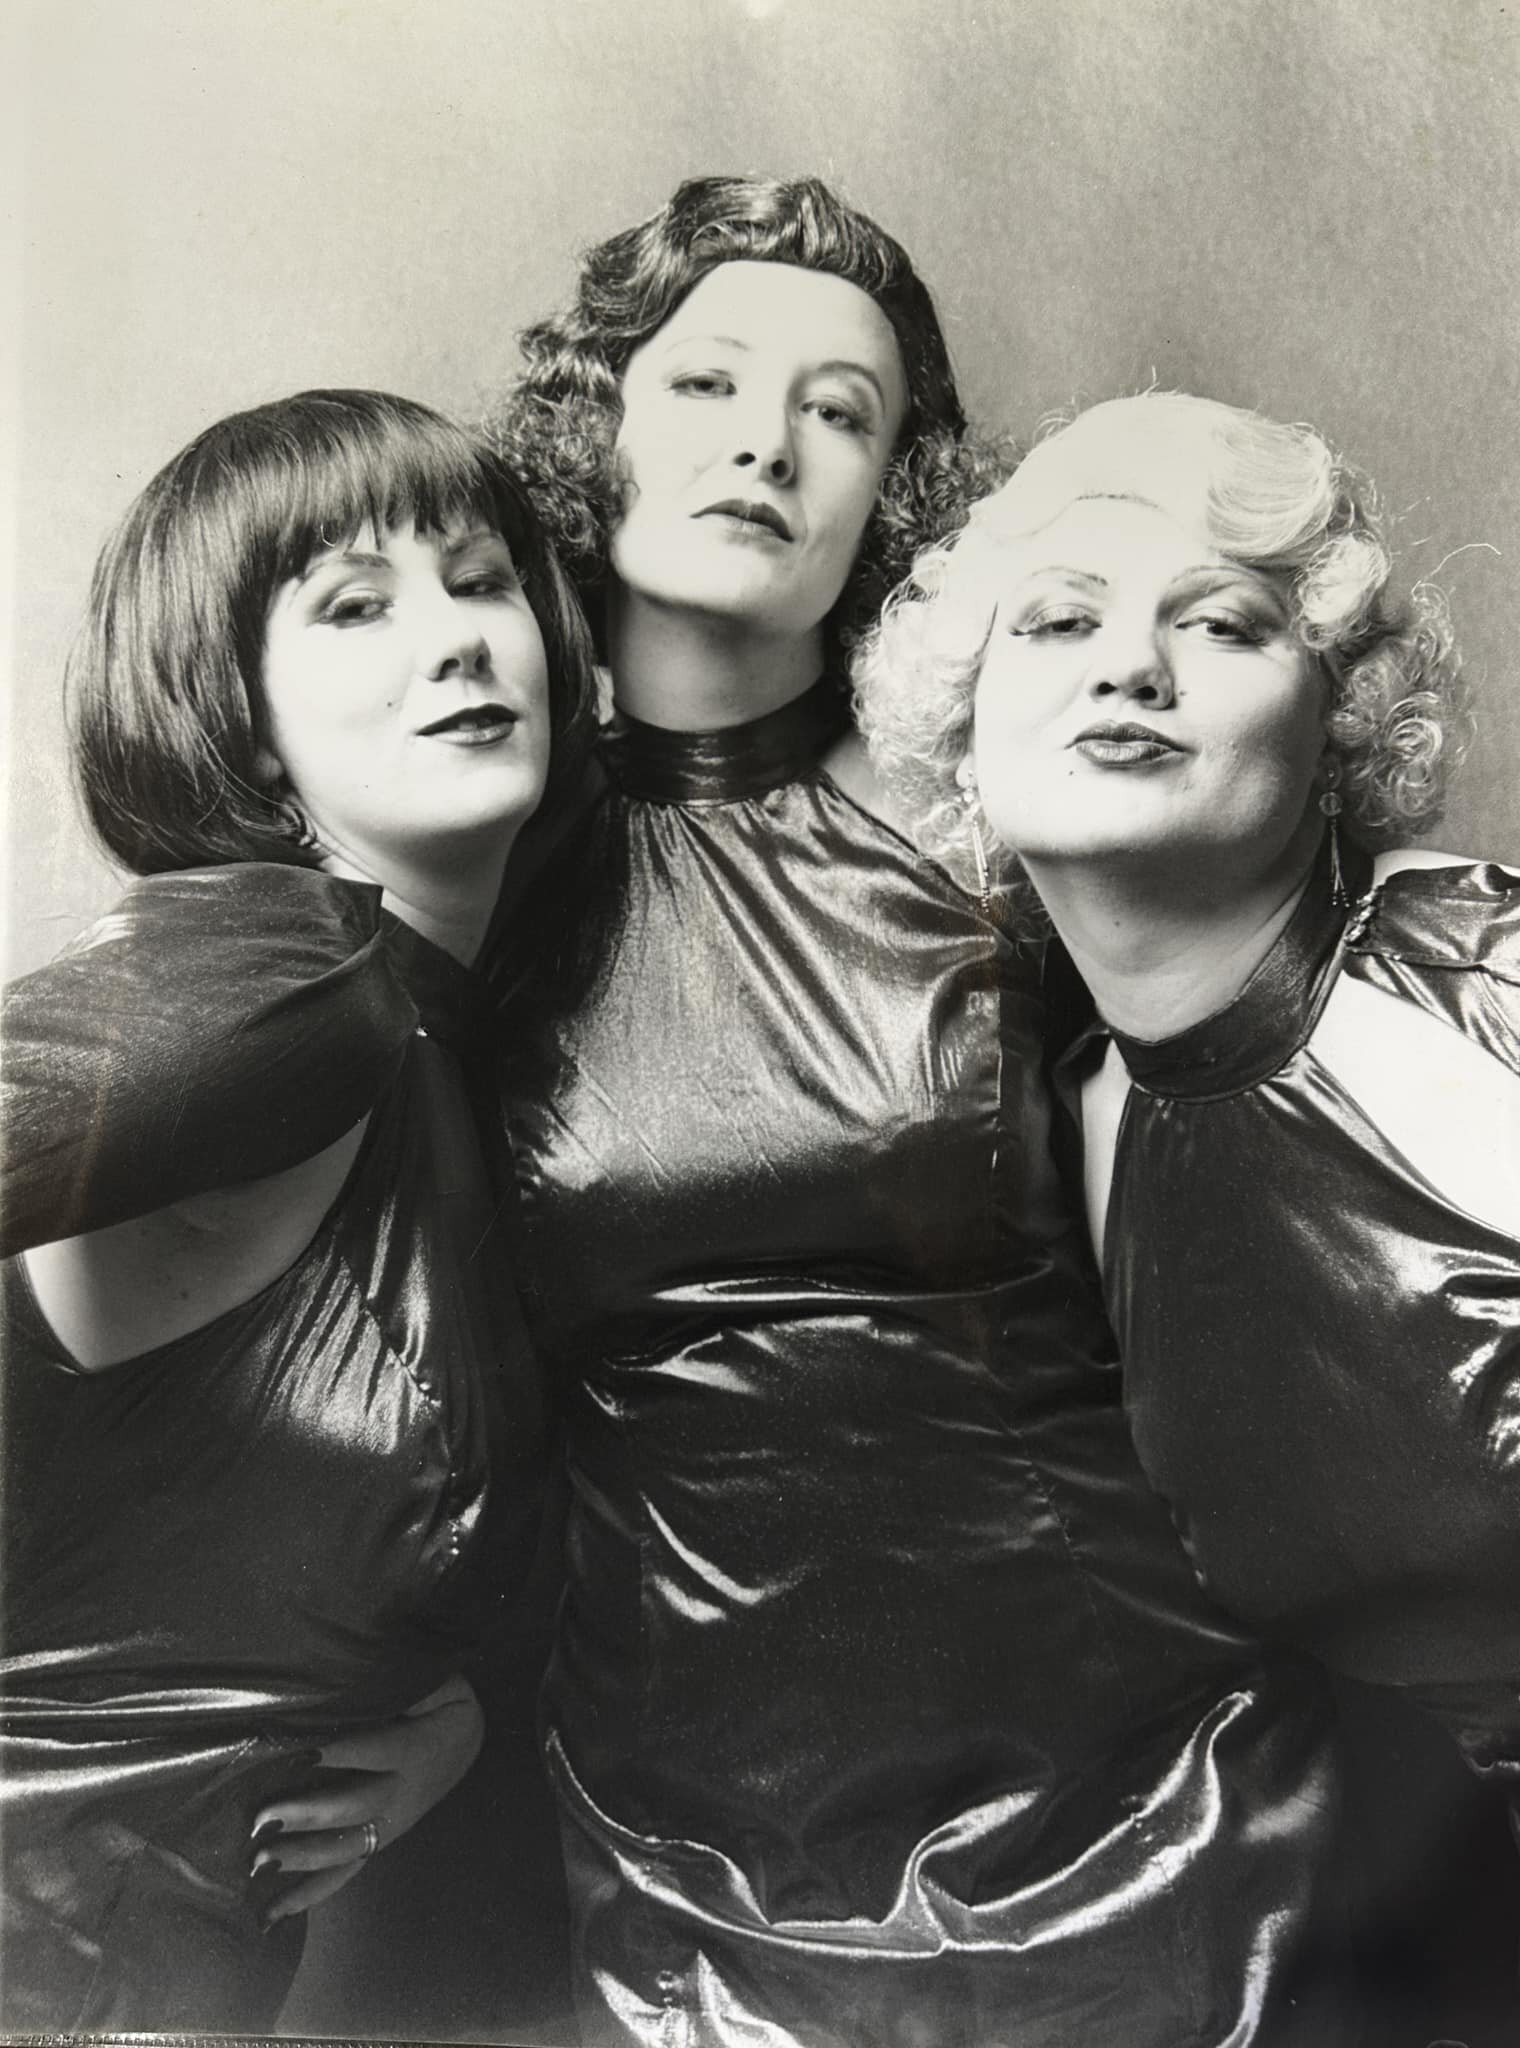 A stumble down memory lane&hellip; the Three Toned Sloths&hellip; newcastles only female female impersonators. 
Yeta was Terri Towelling (right)
Fiona Mundie - Fifi Lala Boomboom (centre)
And me - Frantique (left)

Damn those were awesomely fun times